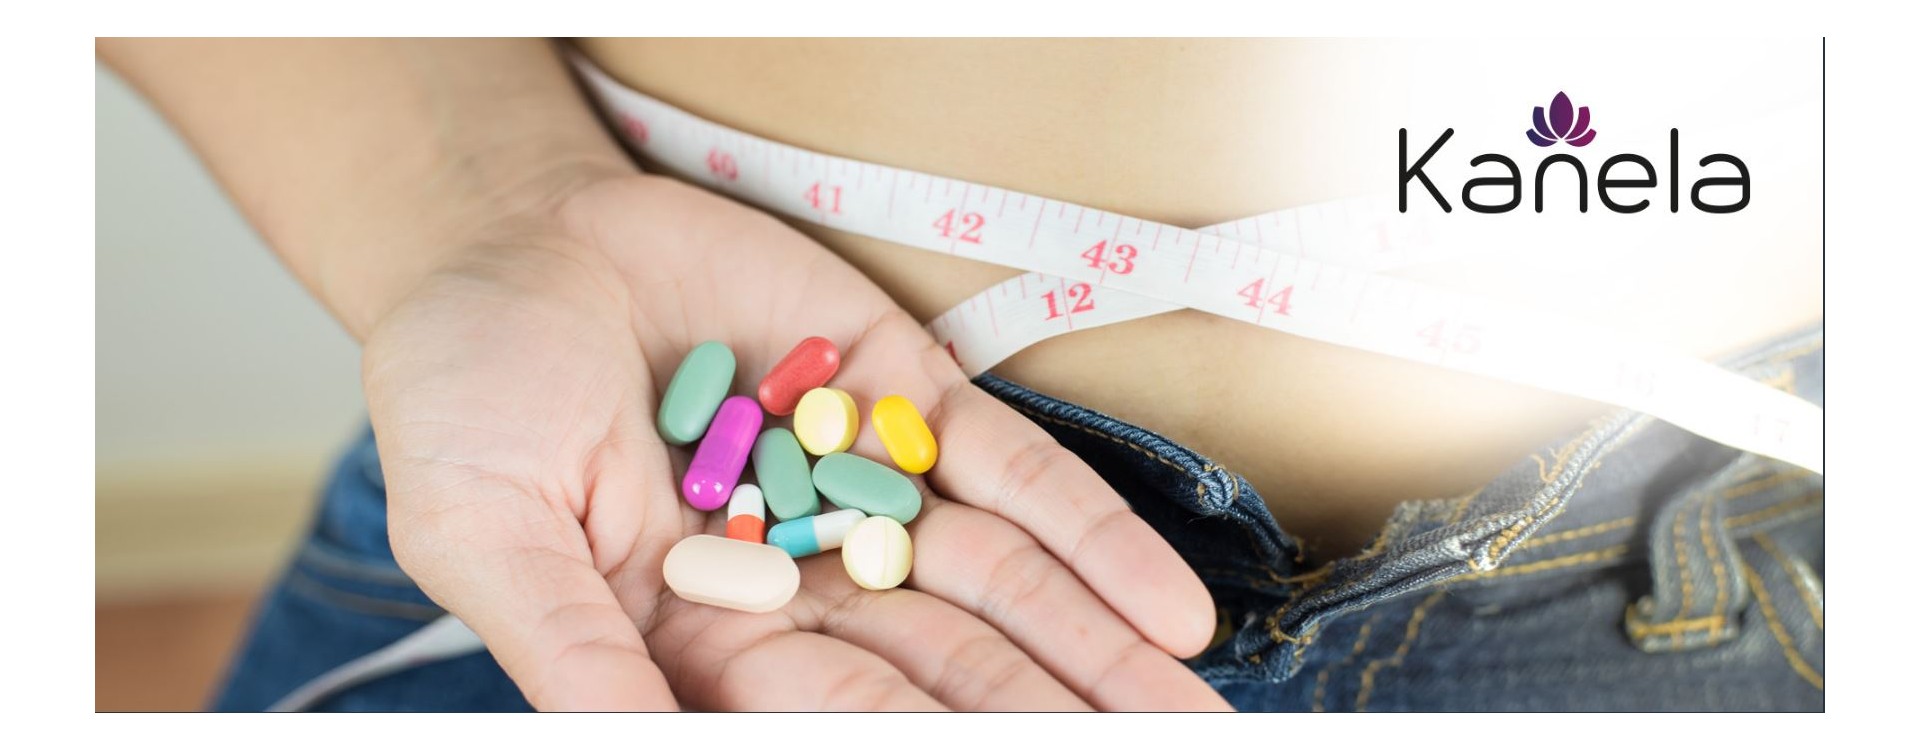 What are the benefits of diet pills?